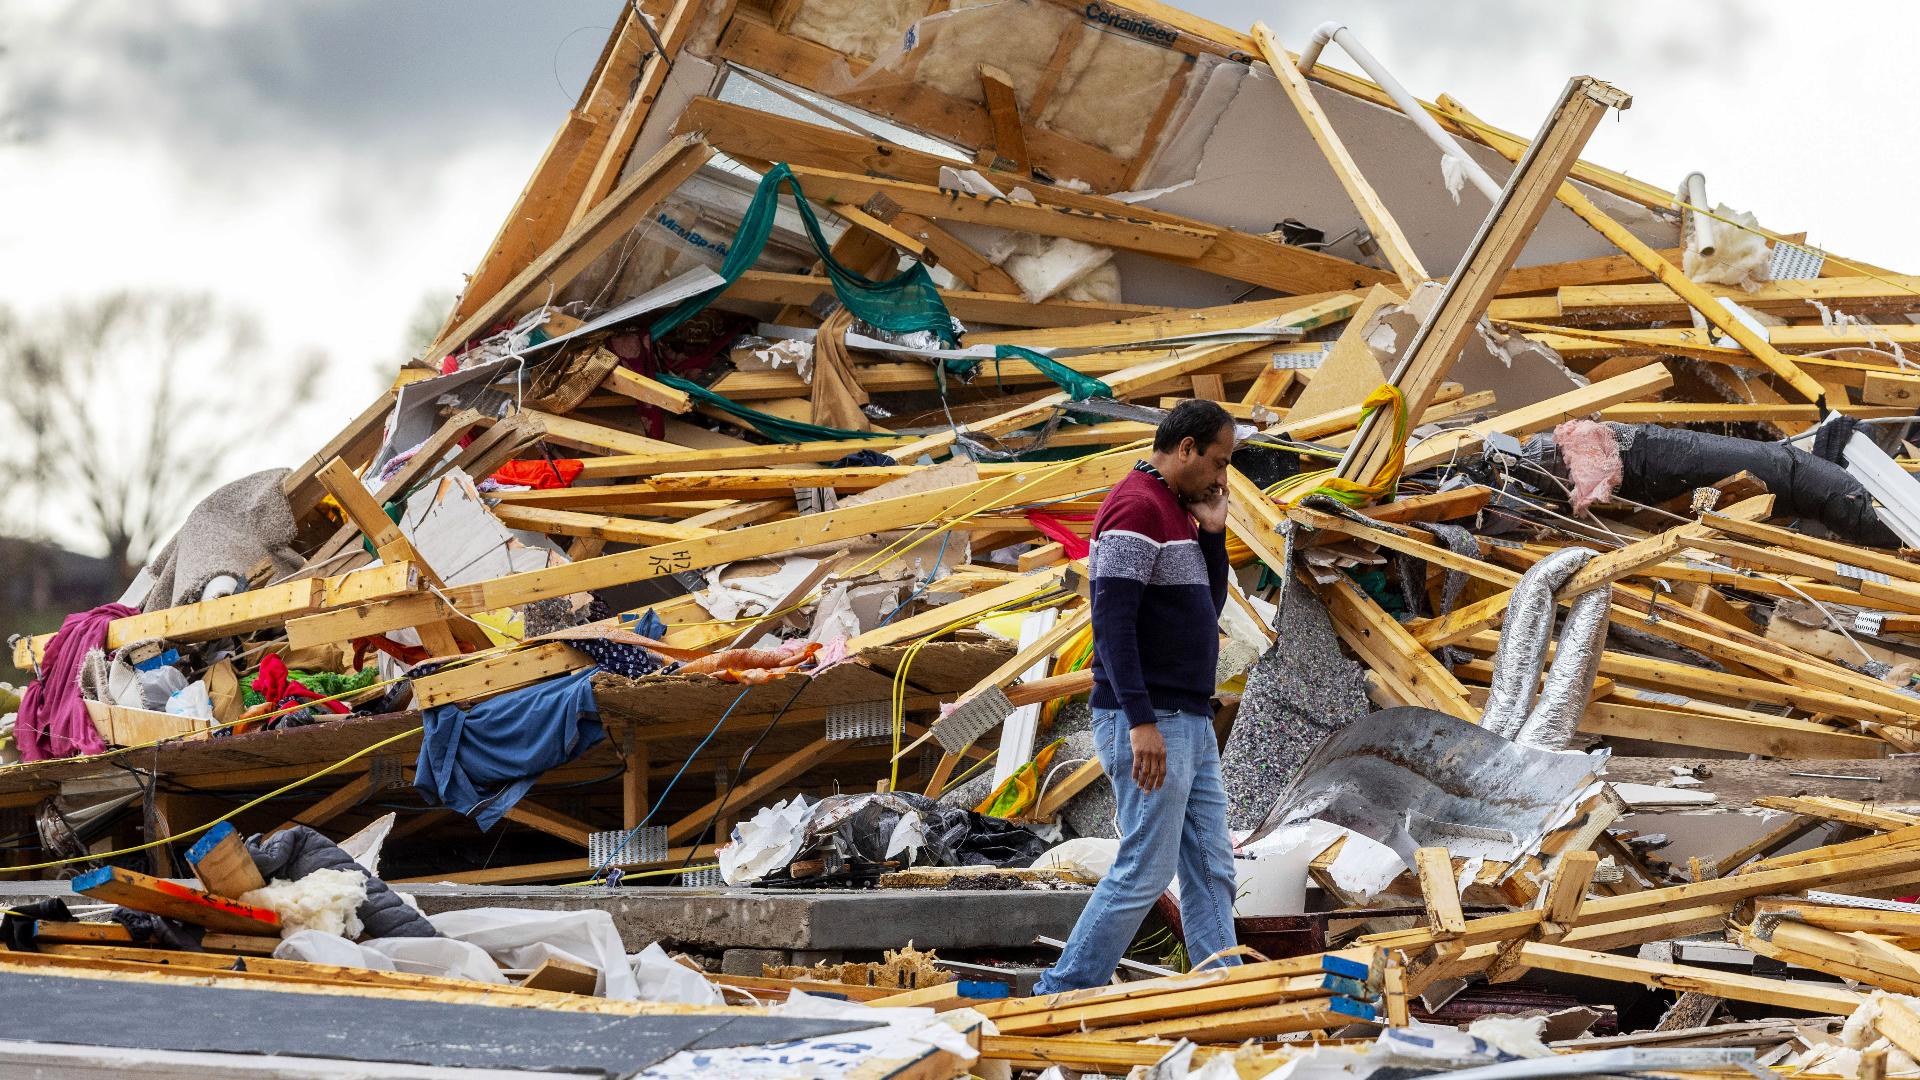 One of the most destructive tornadoes moved for miles Friday through mostly rural farmland before chewing up homes and other structures in the suburbs of Omaha.